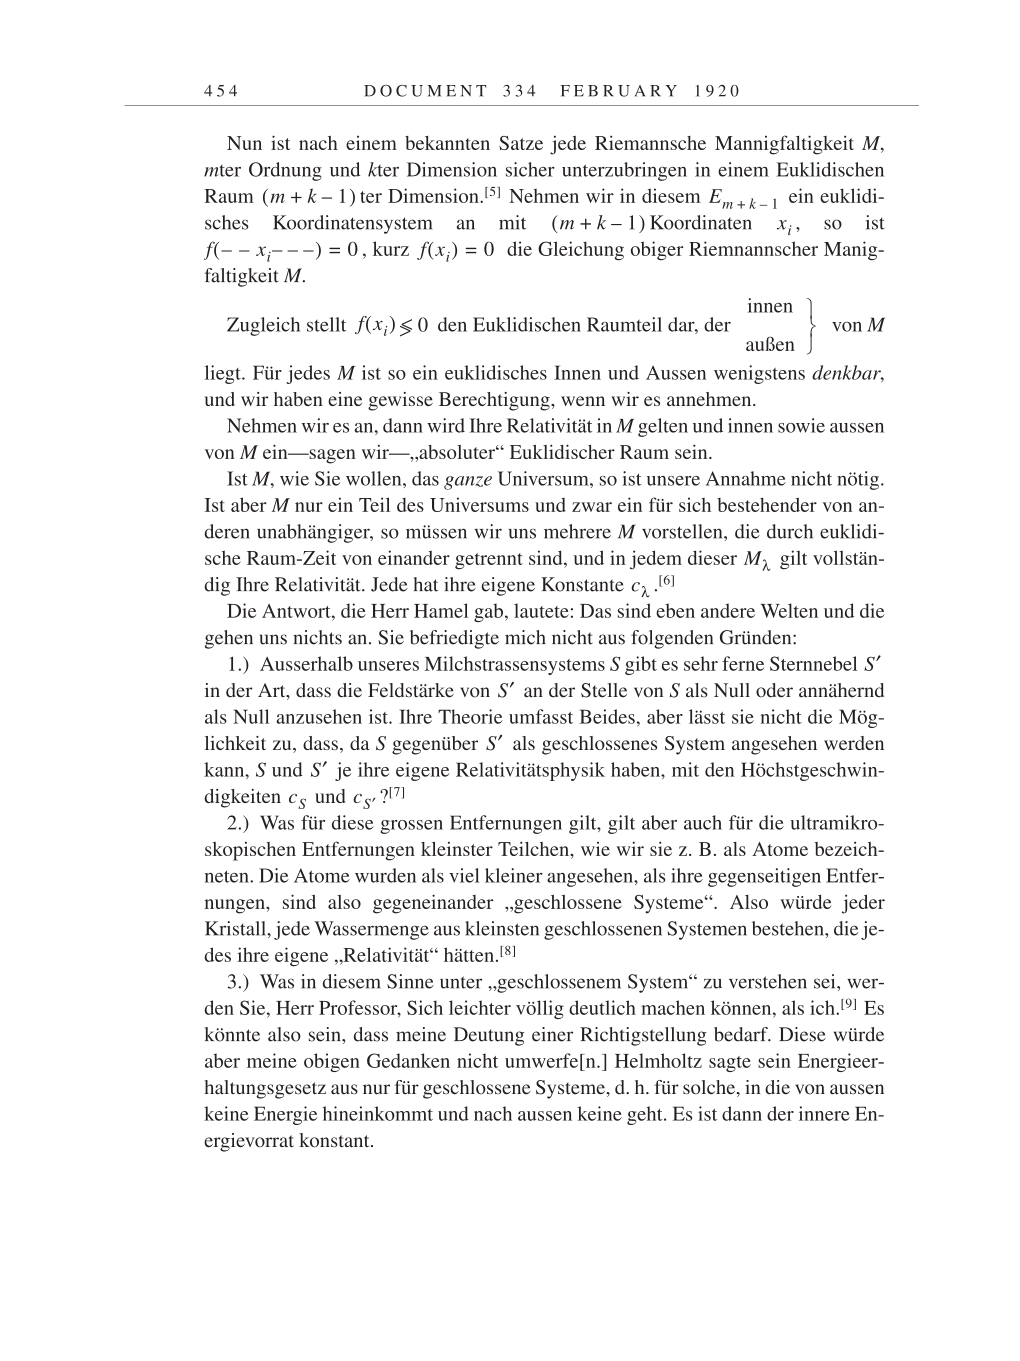 Volume 9: The Berlin Years: Correspondence January 1919-April 1920 page 454